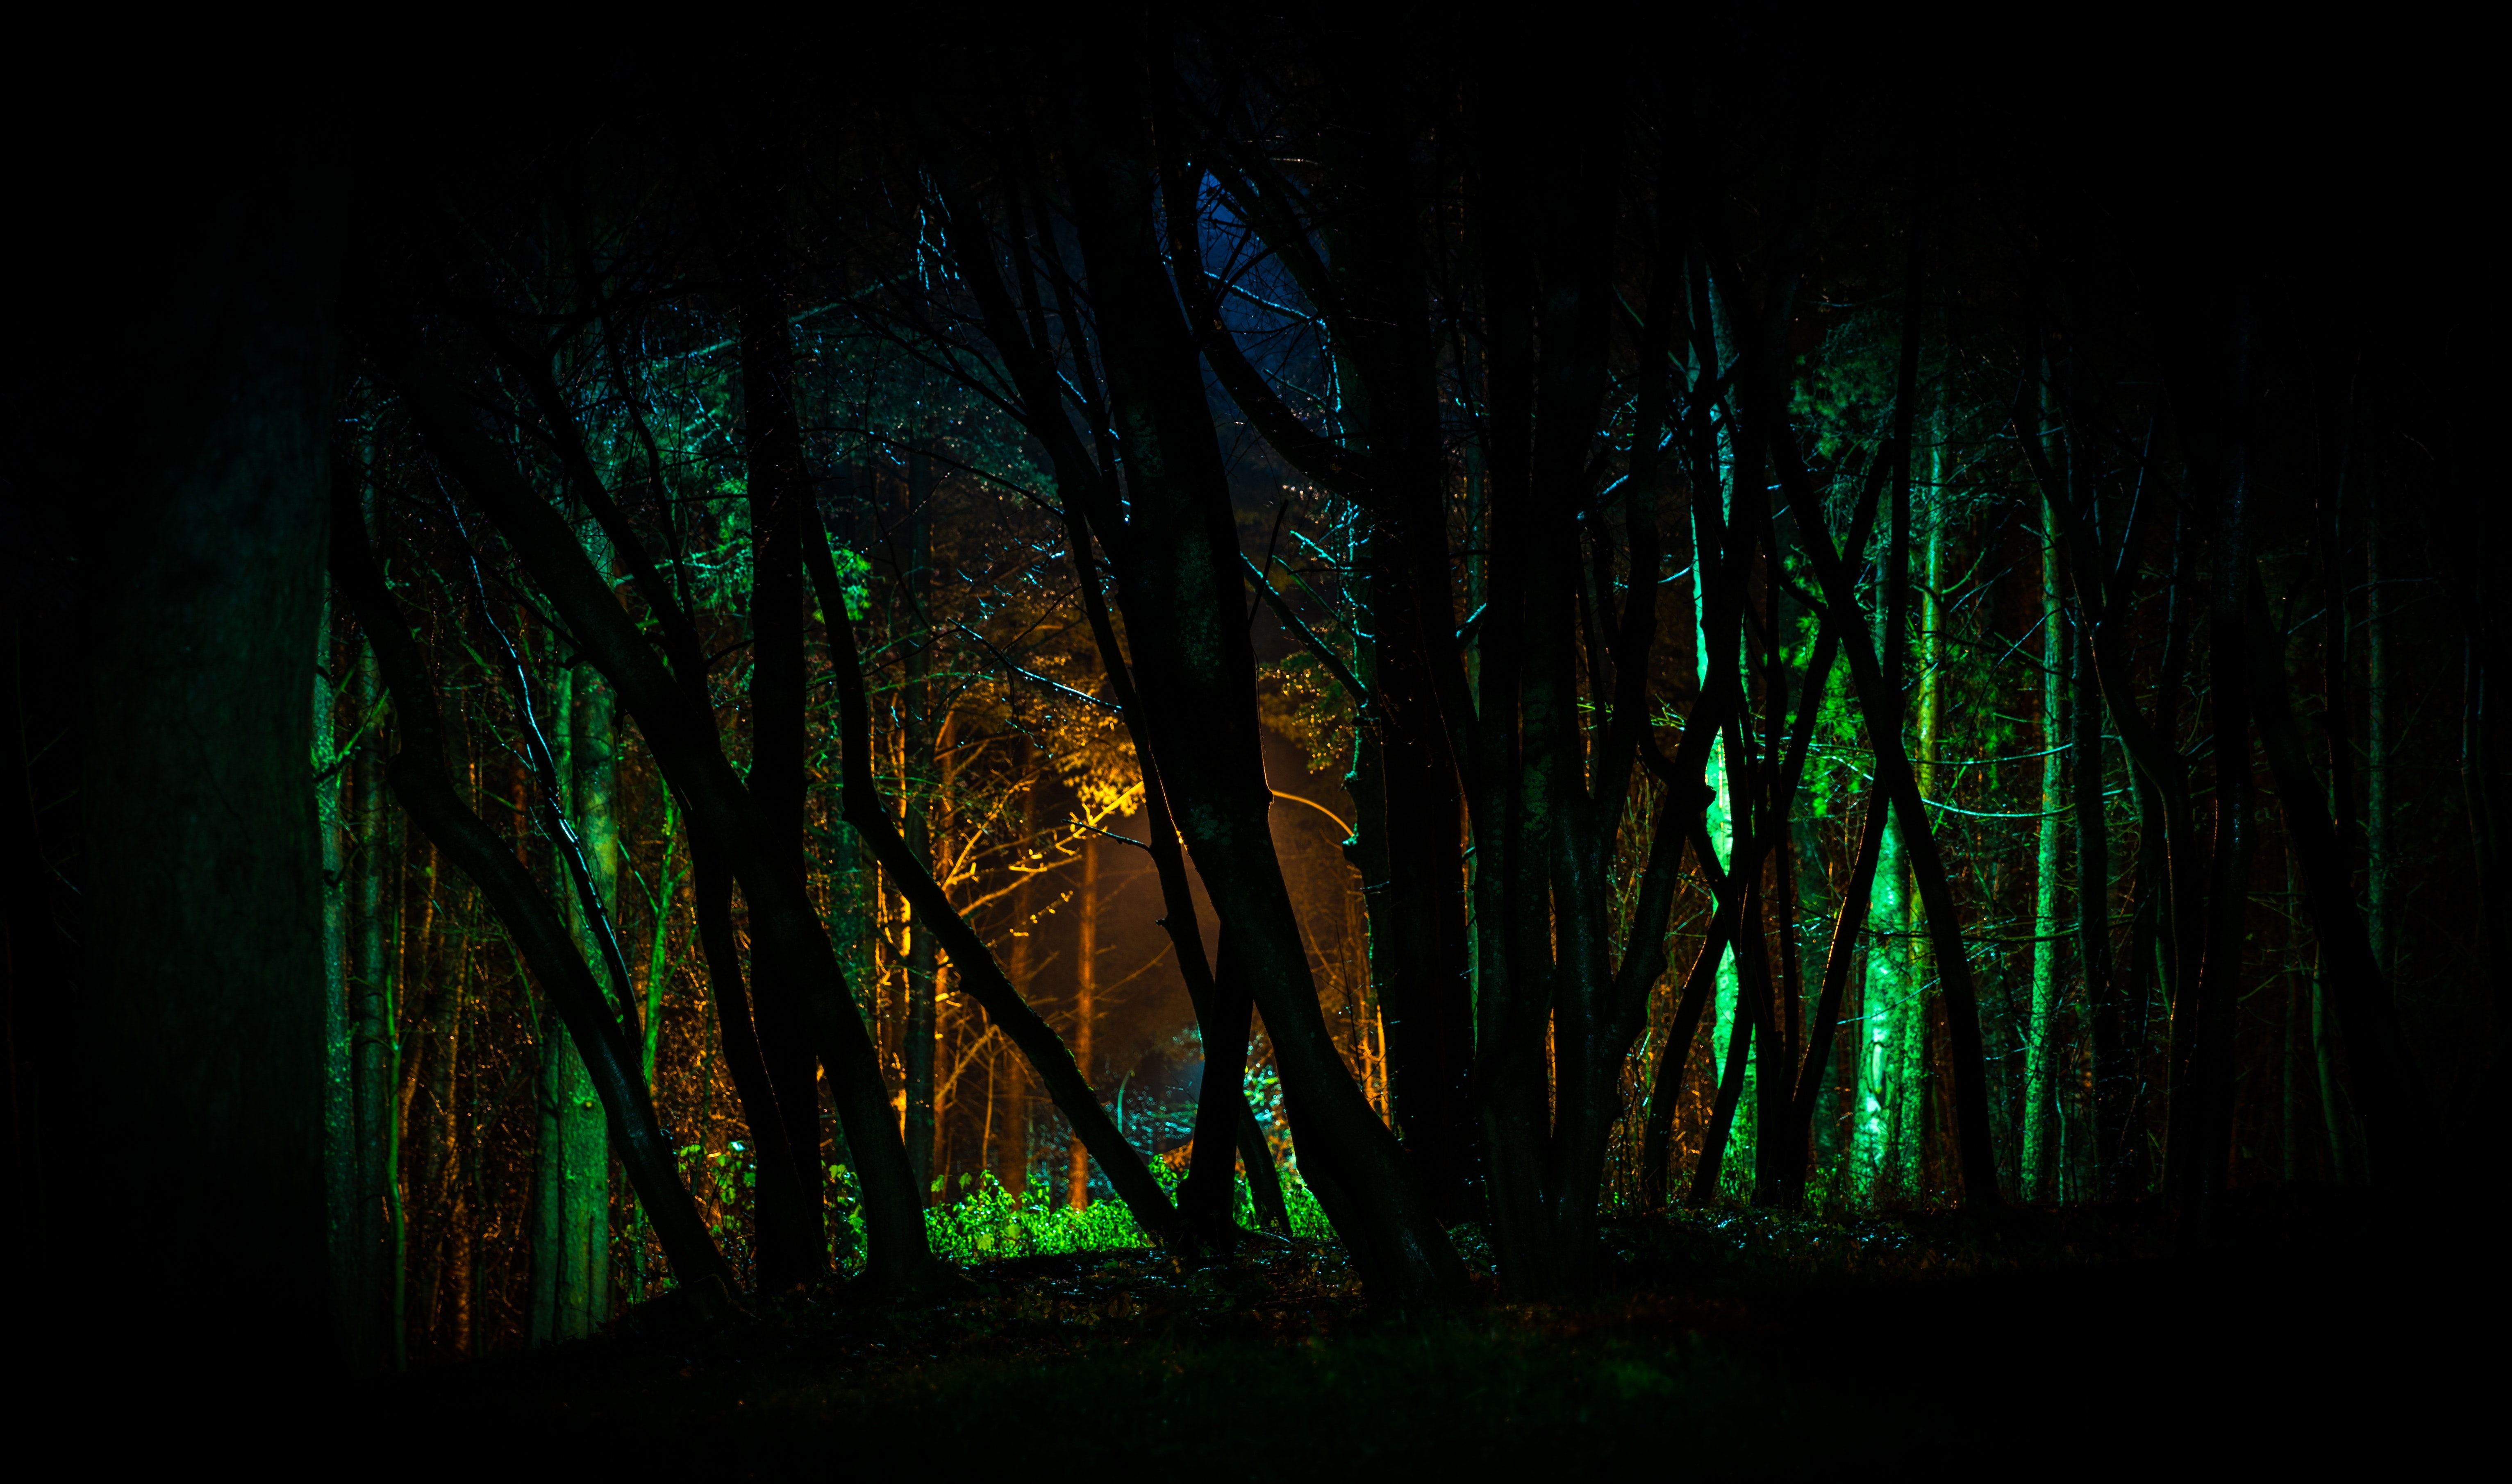 Trees with green light in nighttime photo